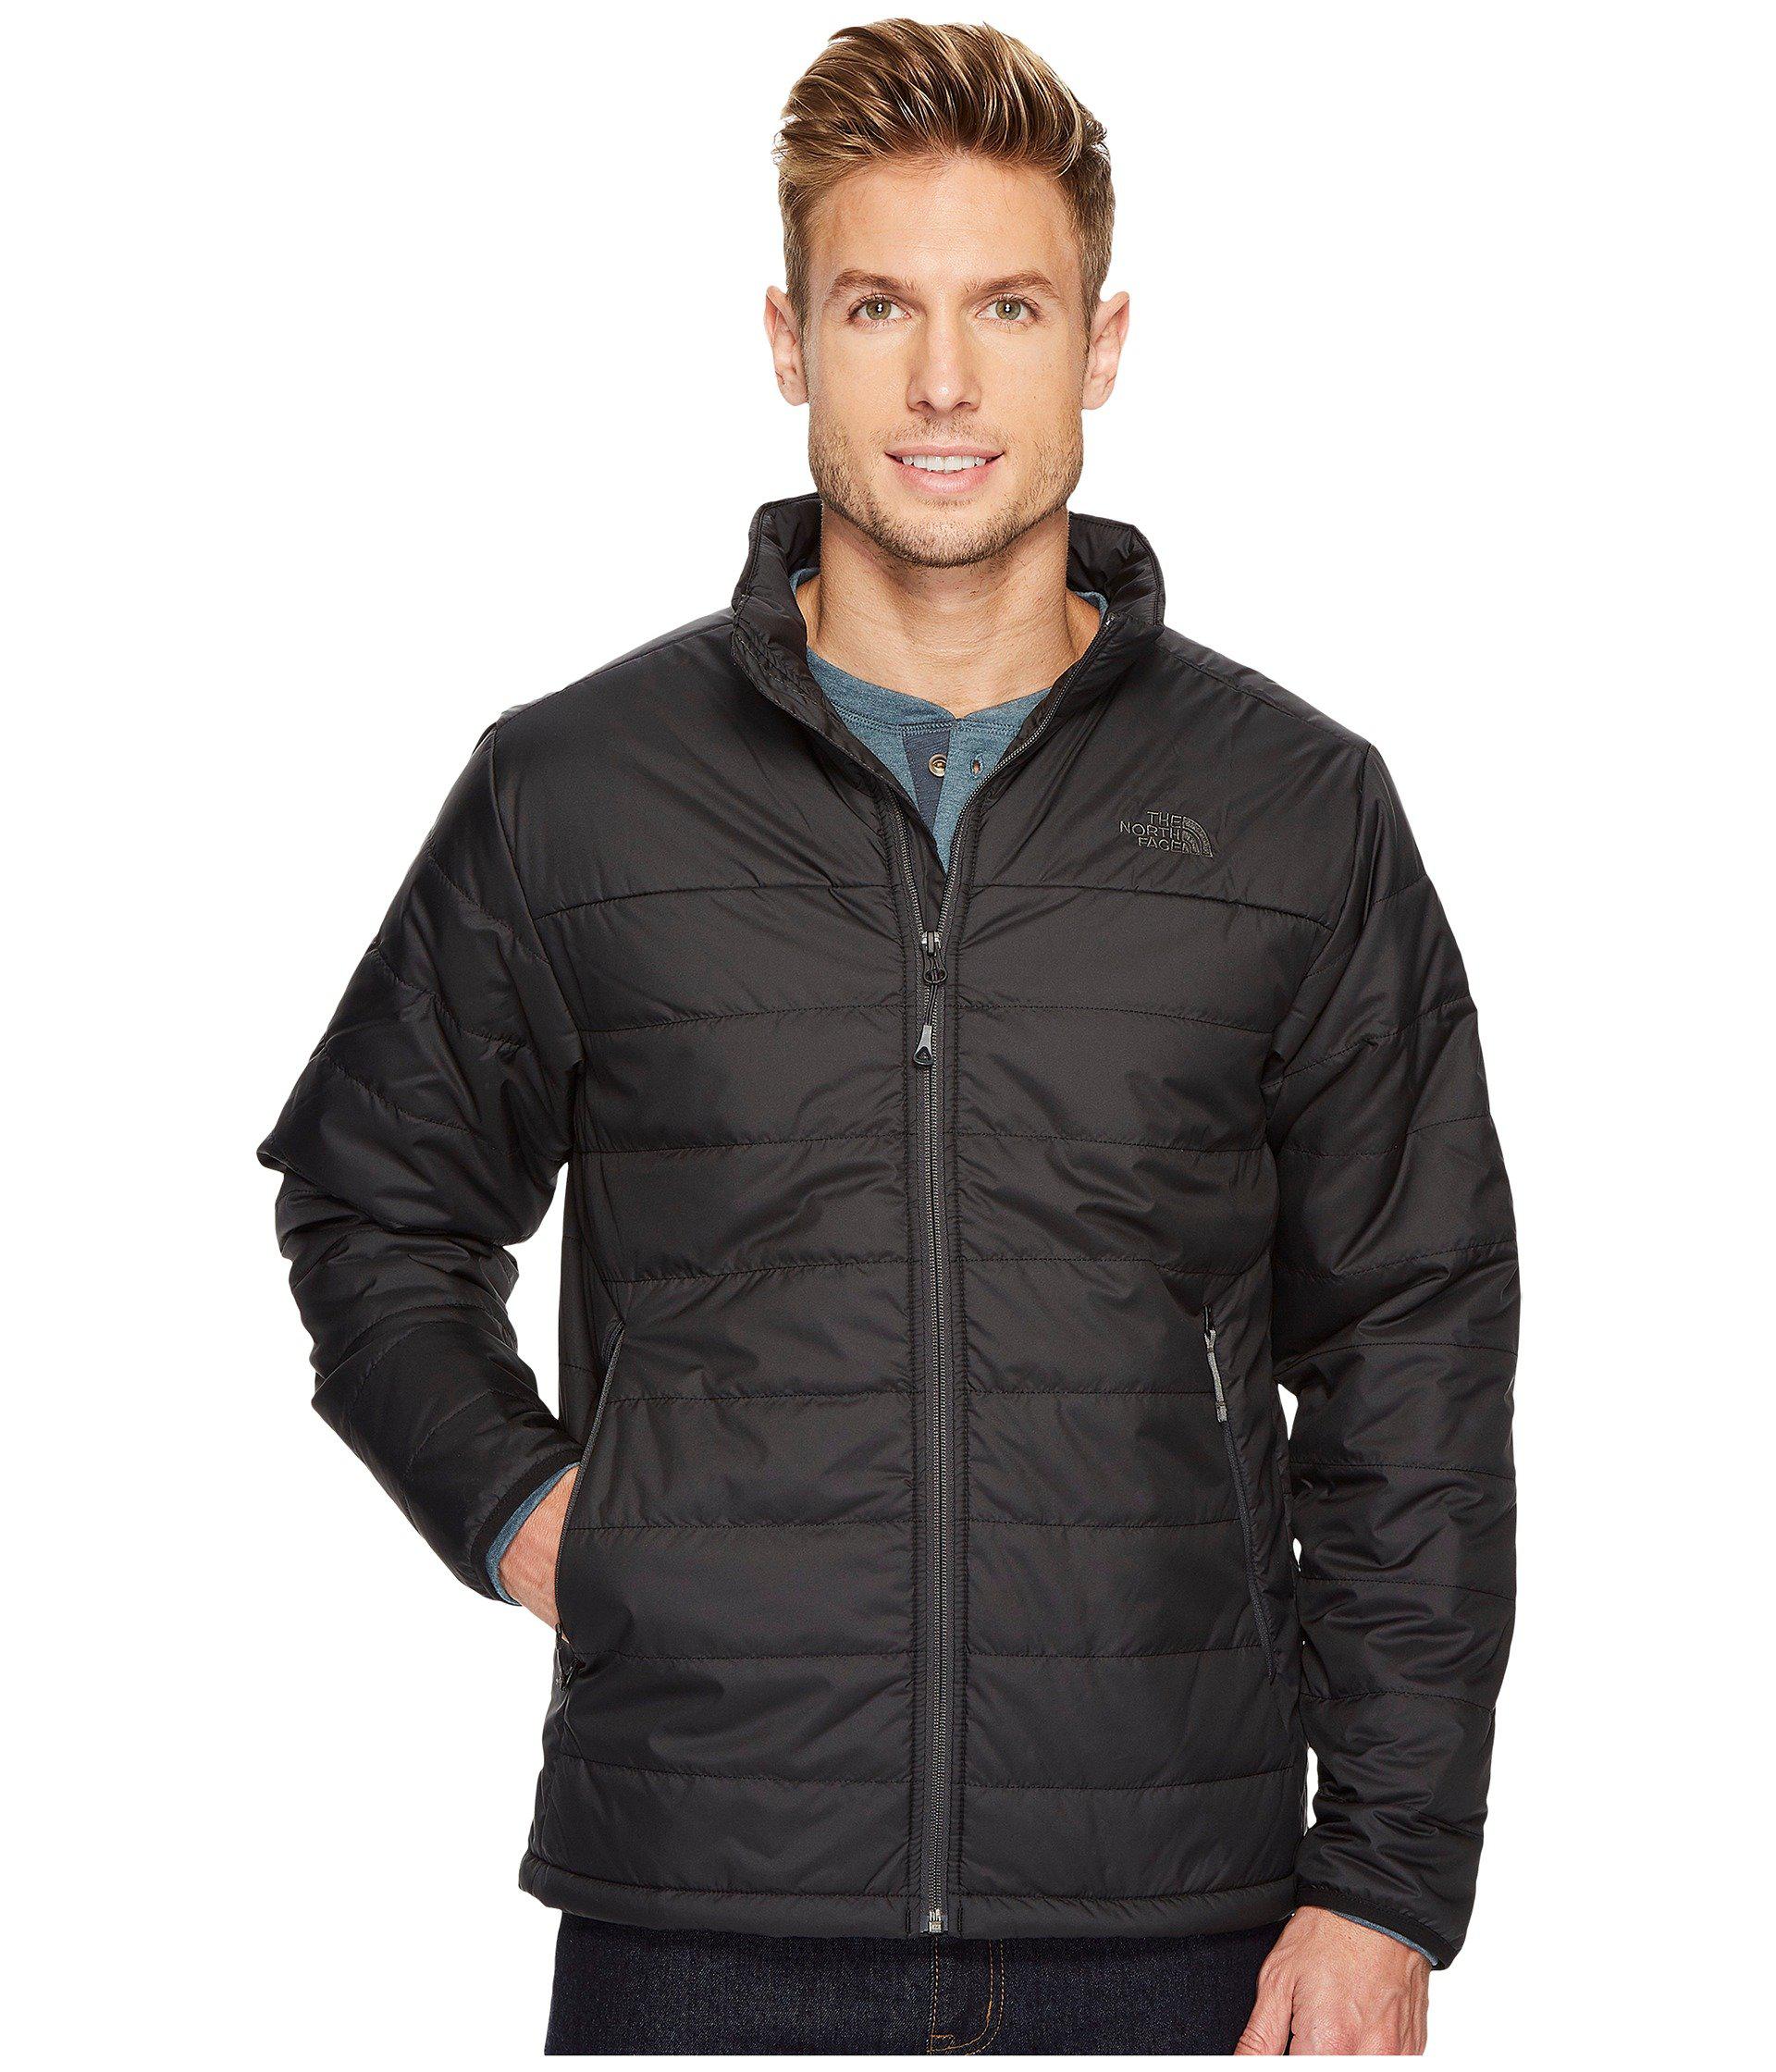 North Face Mens Bombay Jacket Insulated 